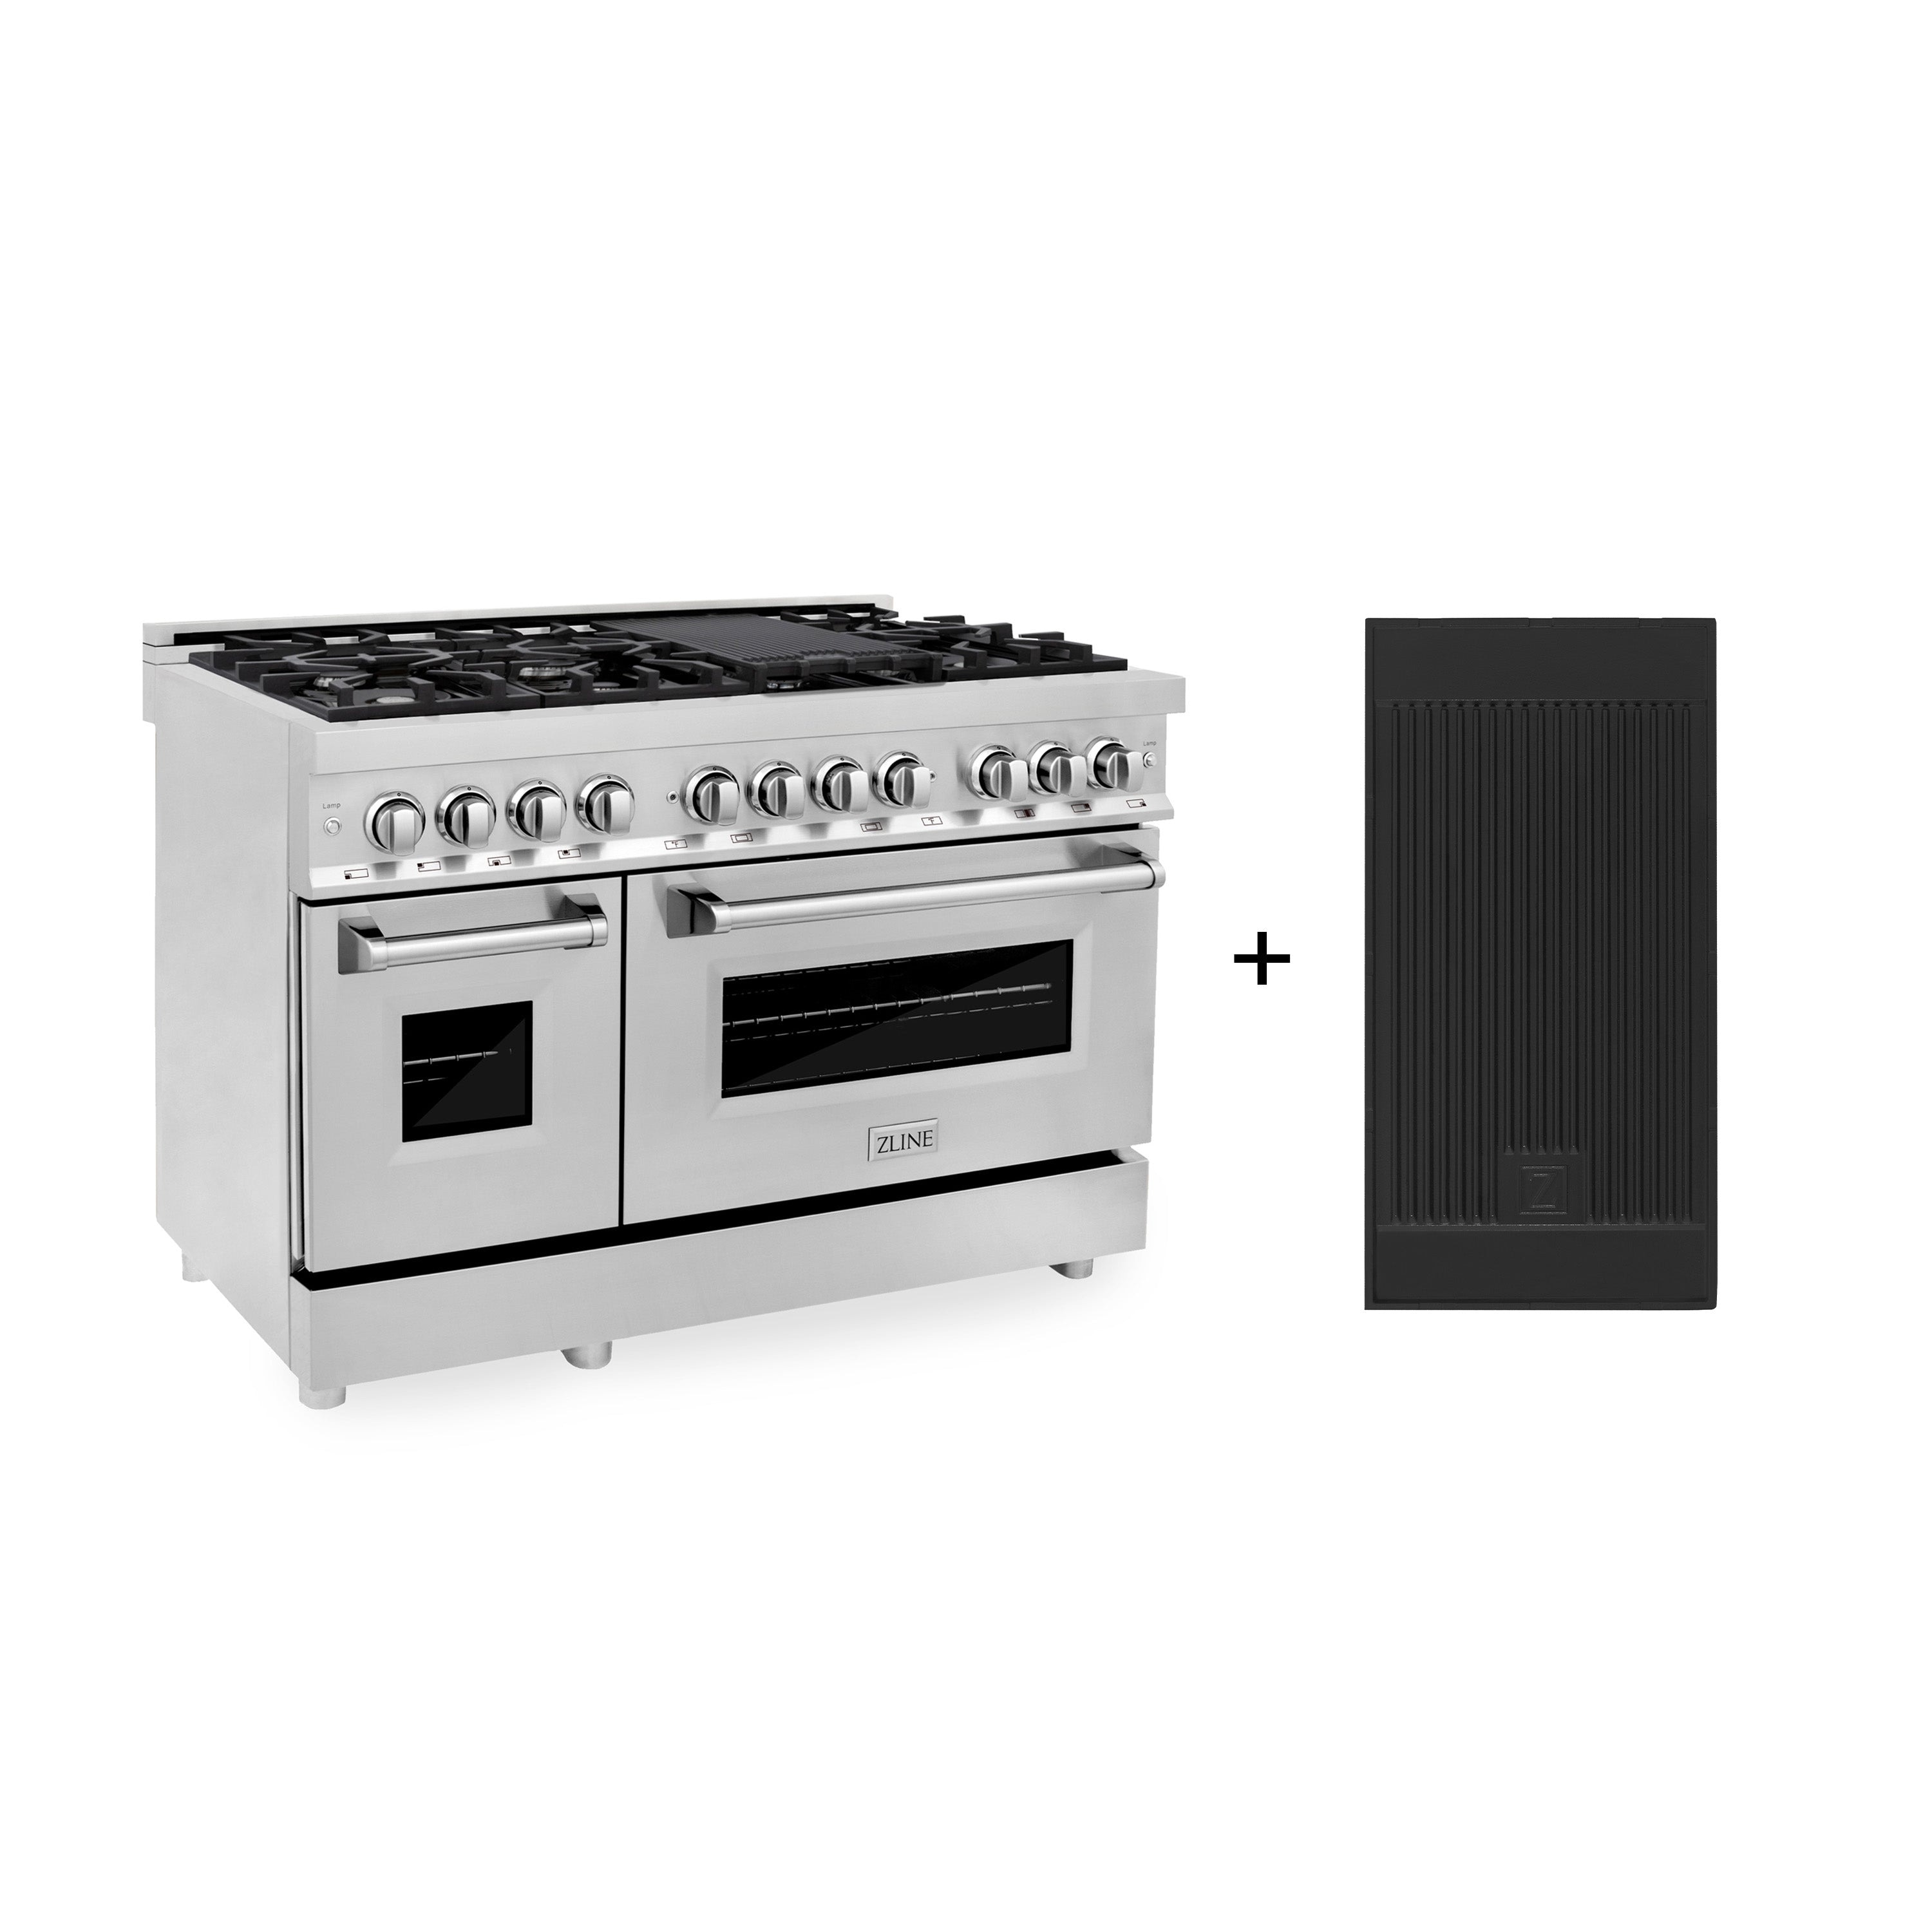 Zline Kitchen and Bath ZLINE 48" 6.0 cu. ft. Electric Oven and Gas Cooktop Dual Fuel Range with Griddle in Stainless Steel (RA-GR-48)